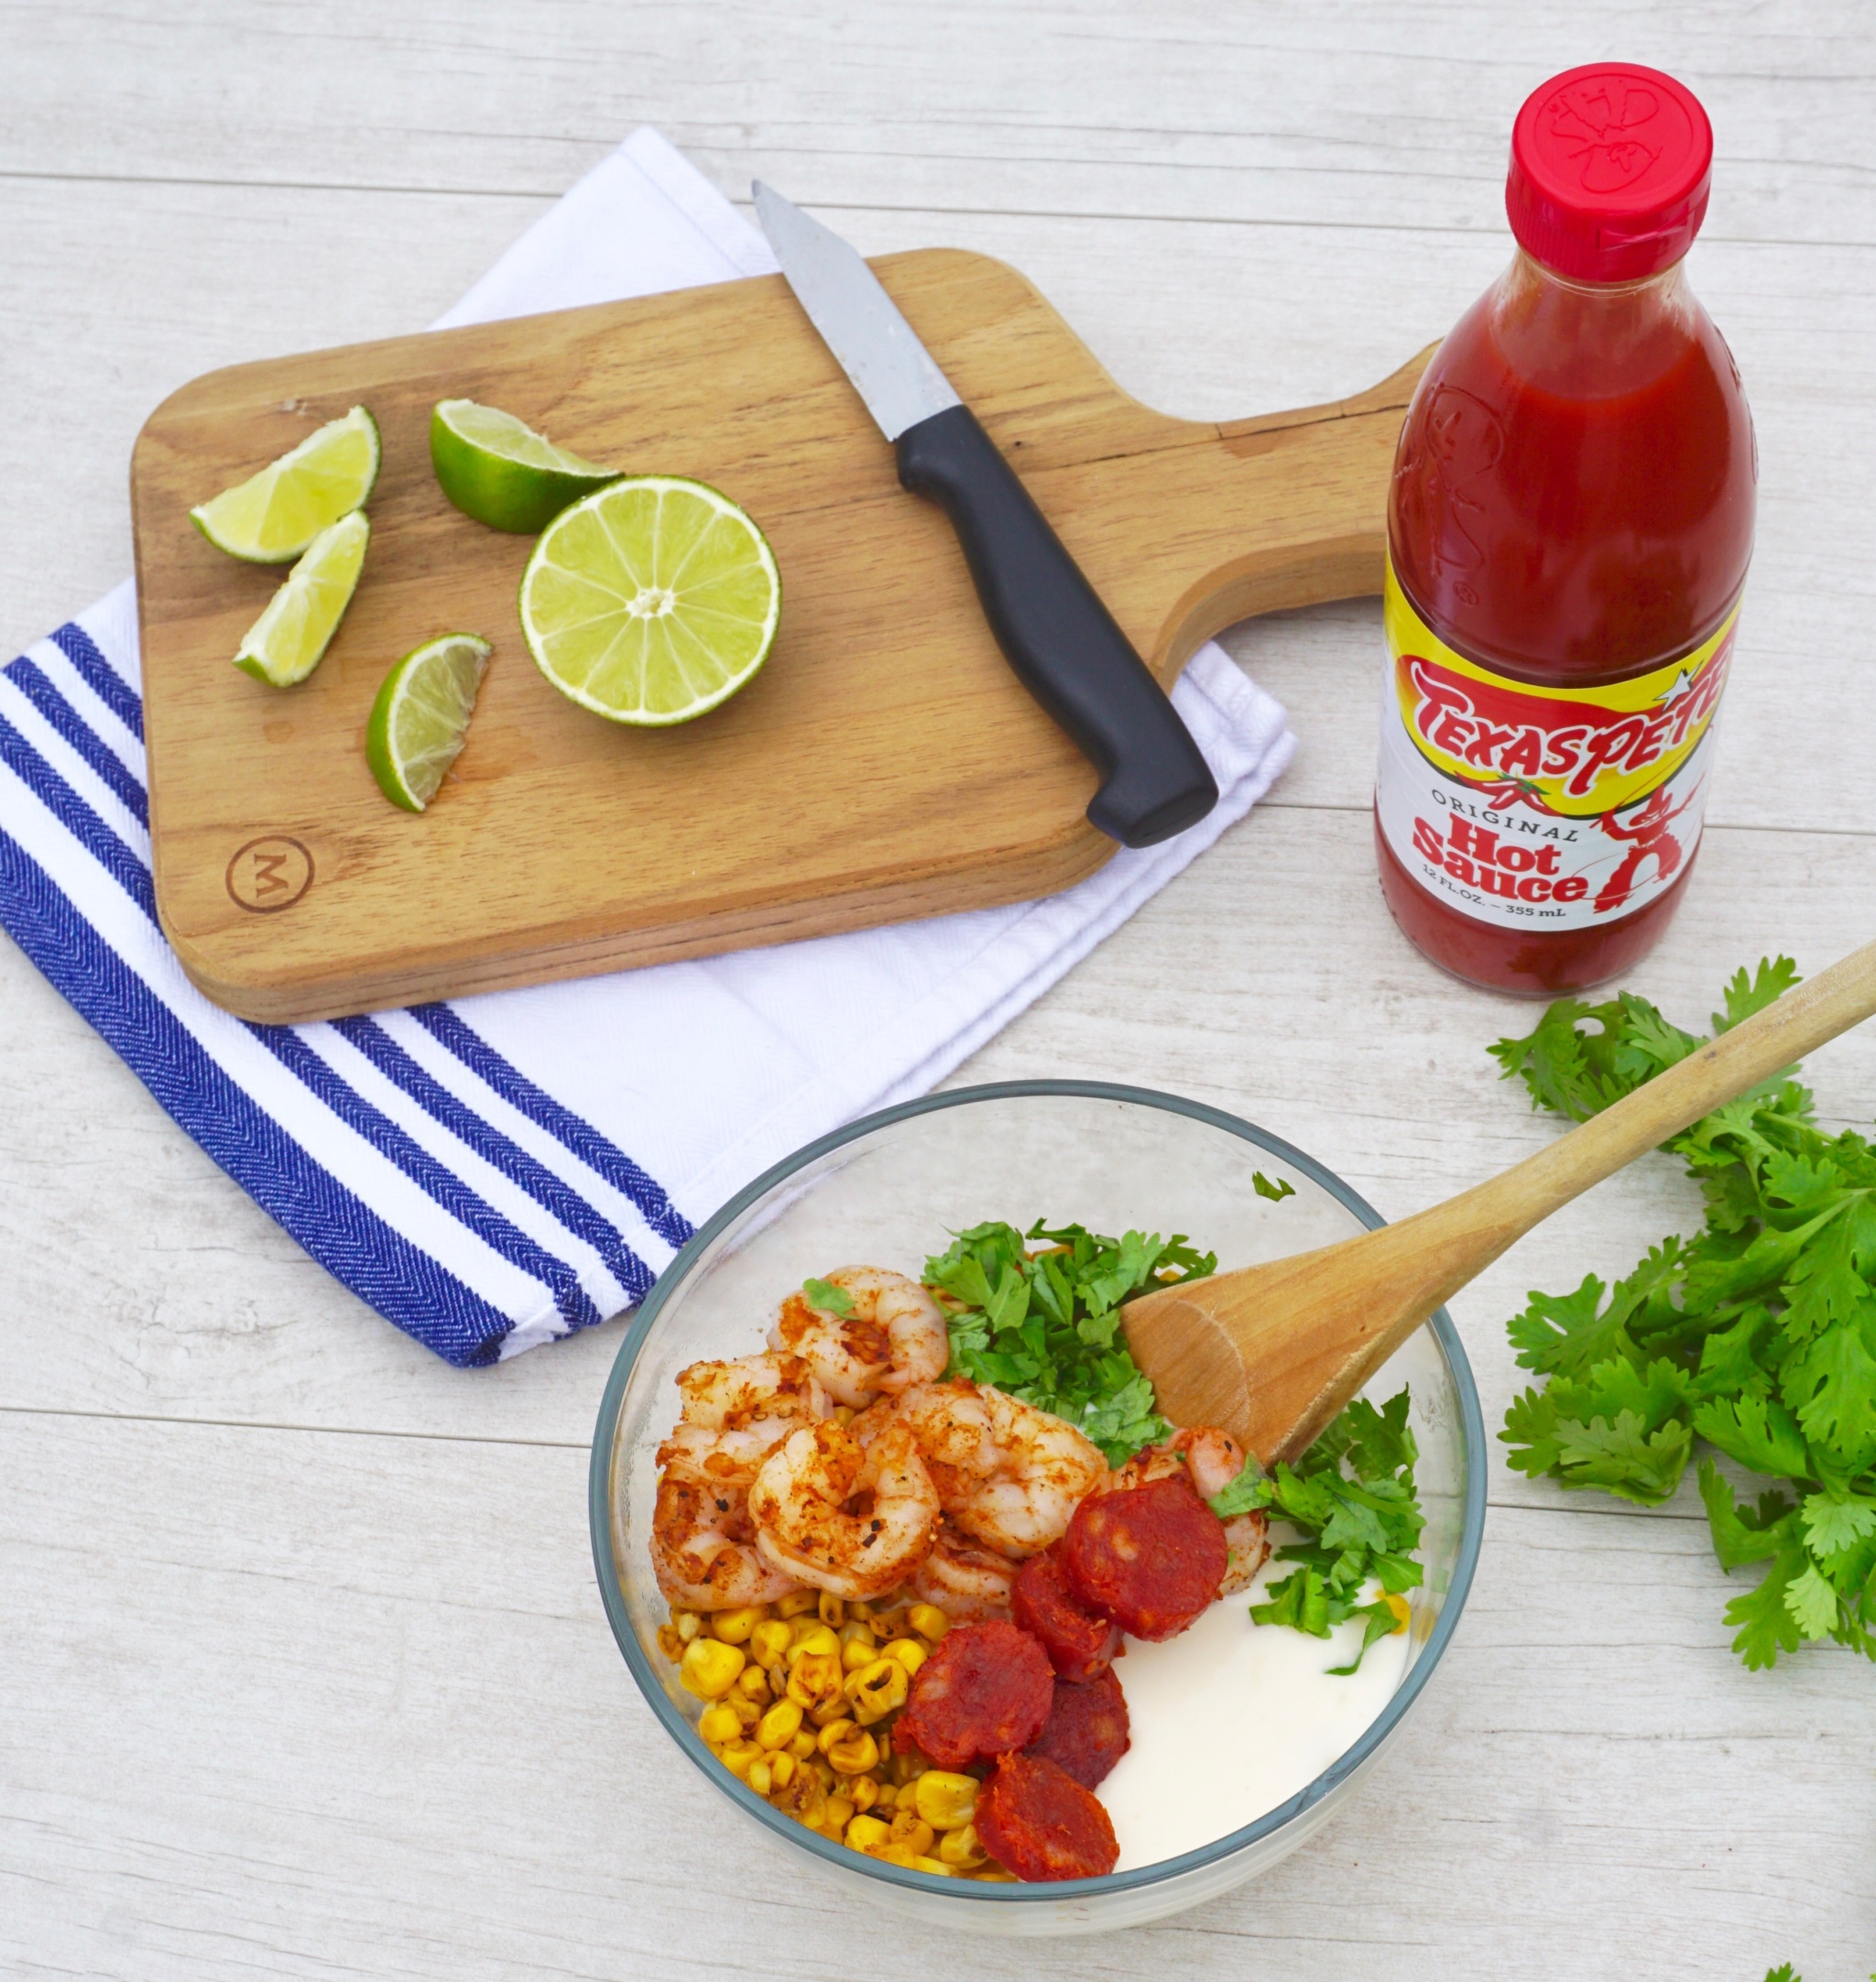 Charred Mexican Corn Salad with Shrimp and Chorizo recipe with Texas Pete hot sauce